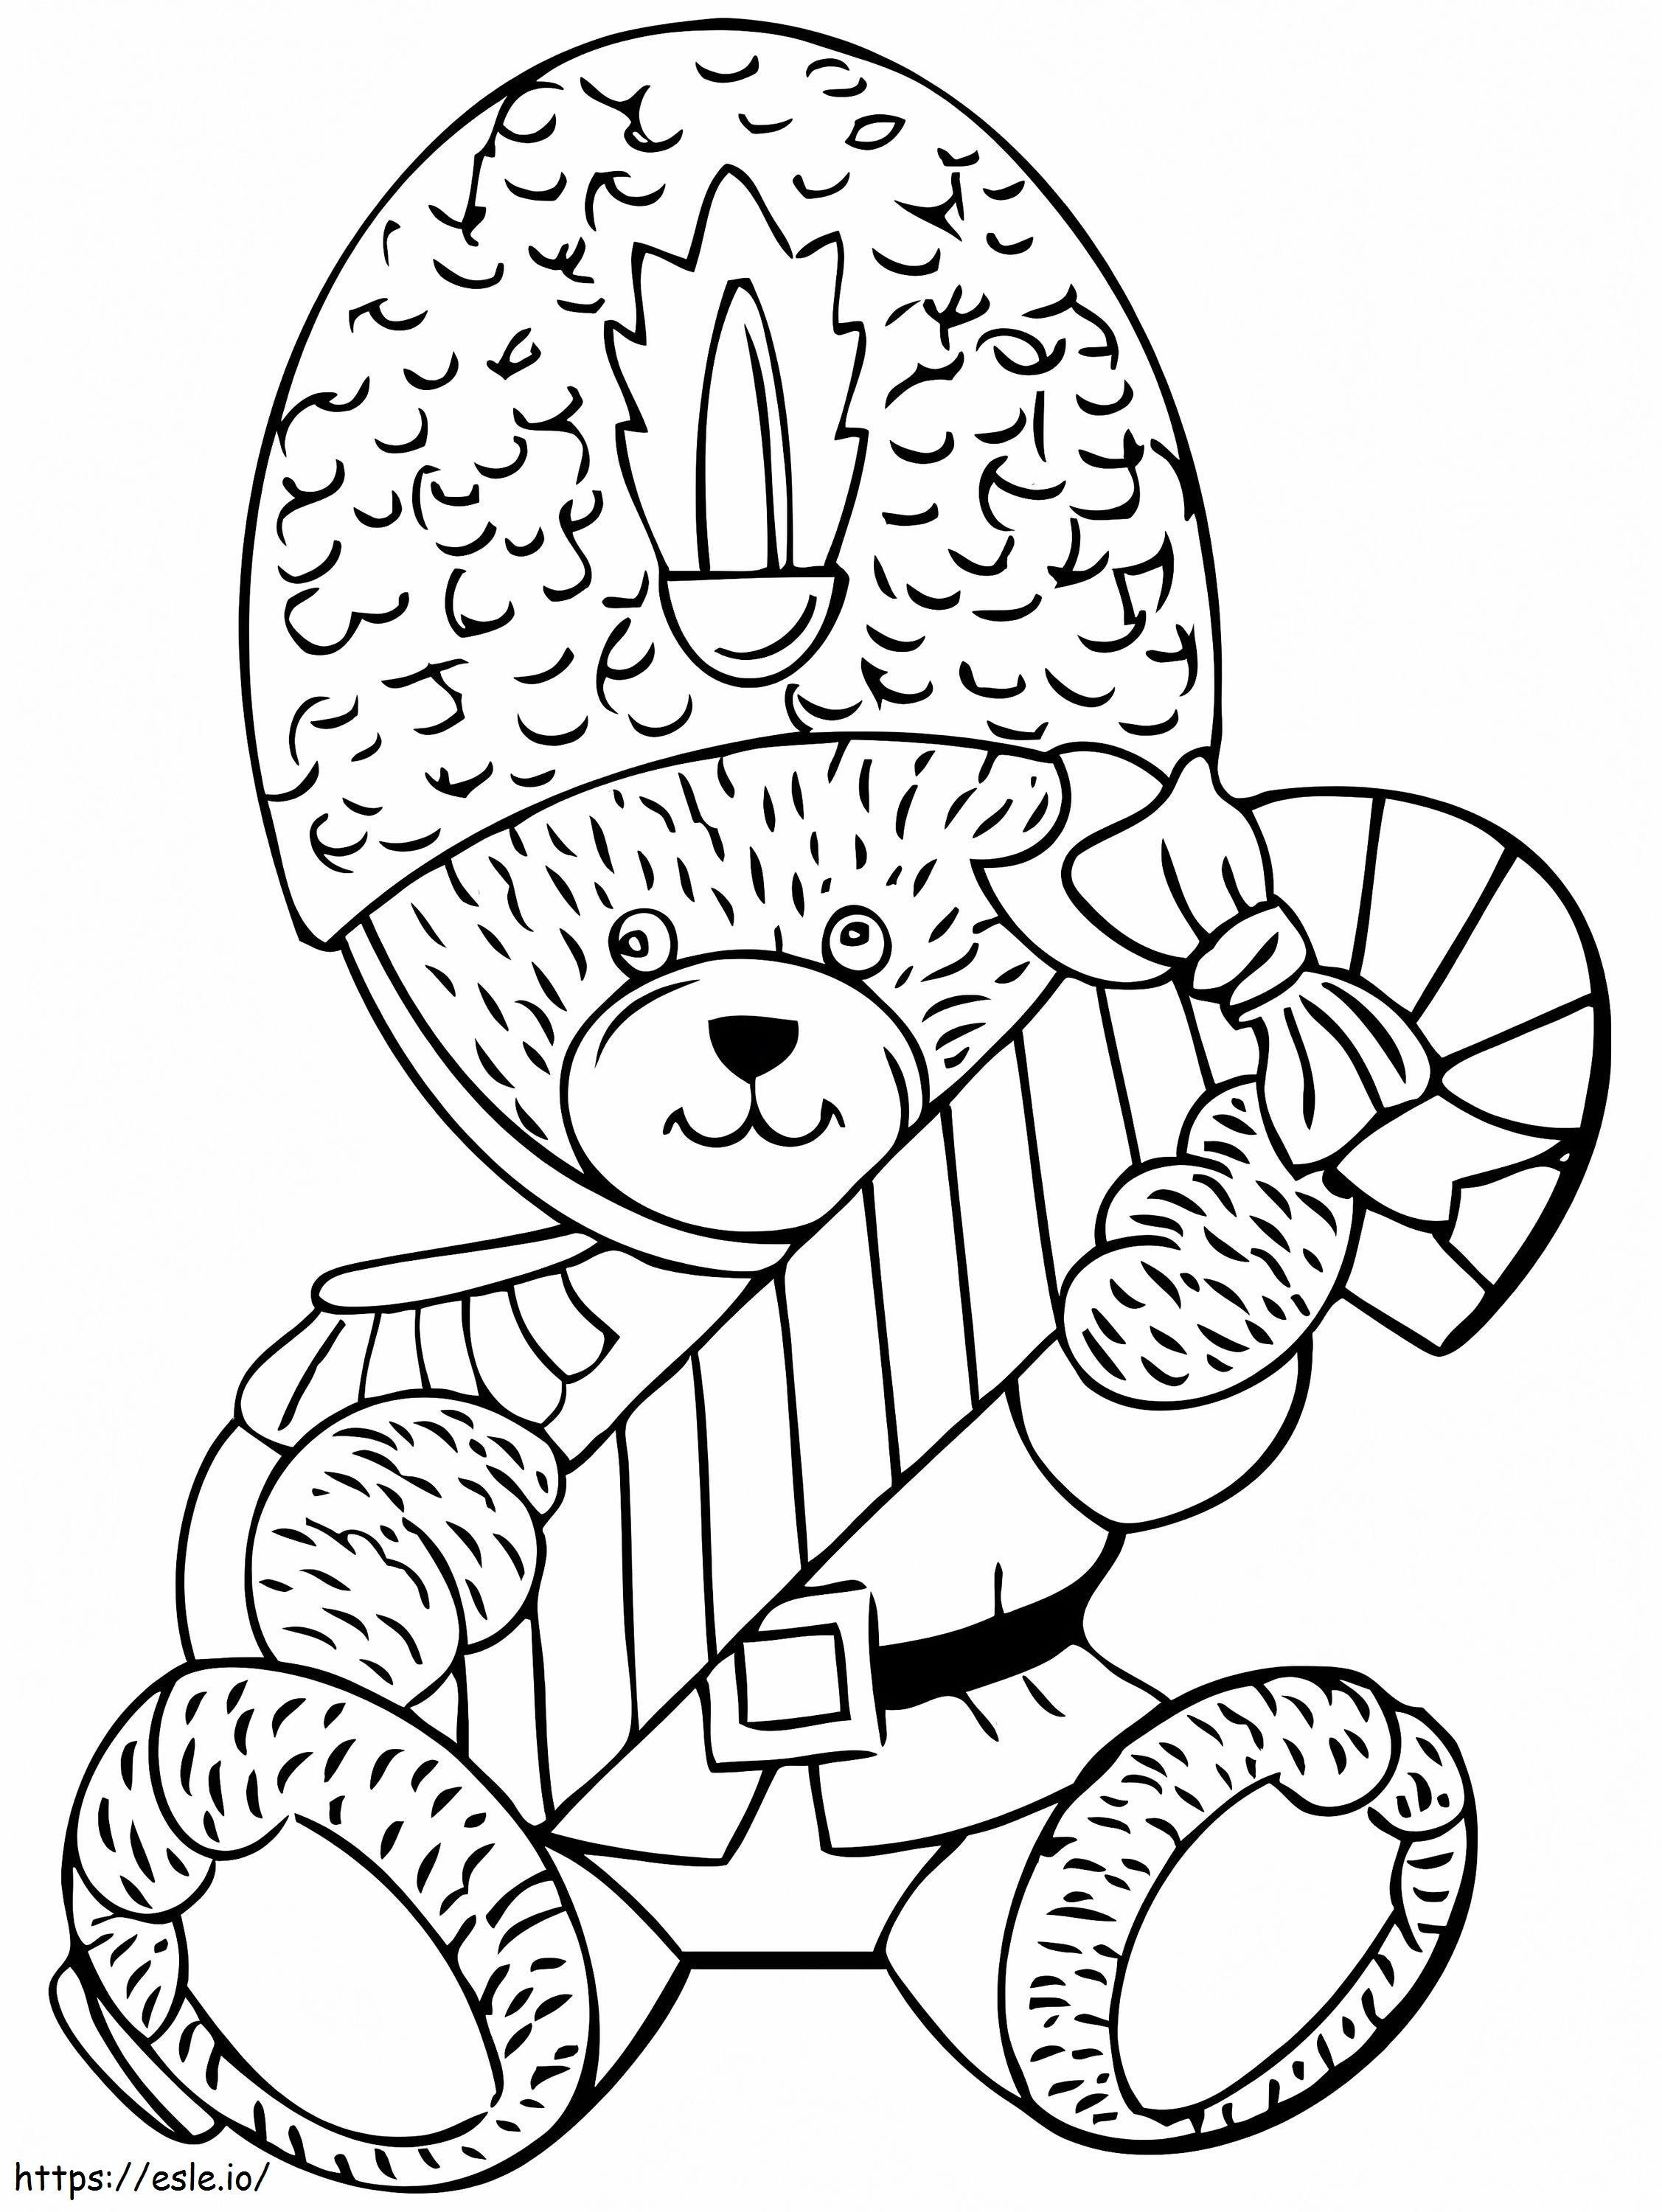 Teddy Bear With Candy Cane coloring page